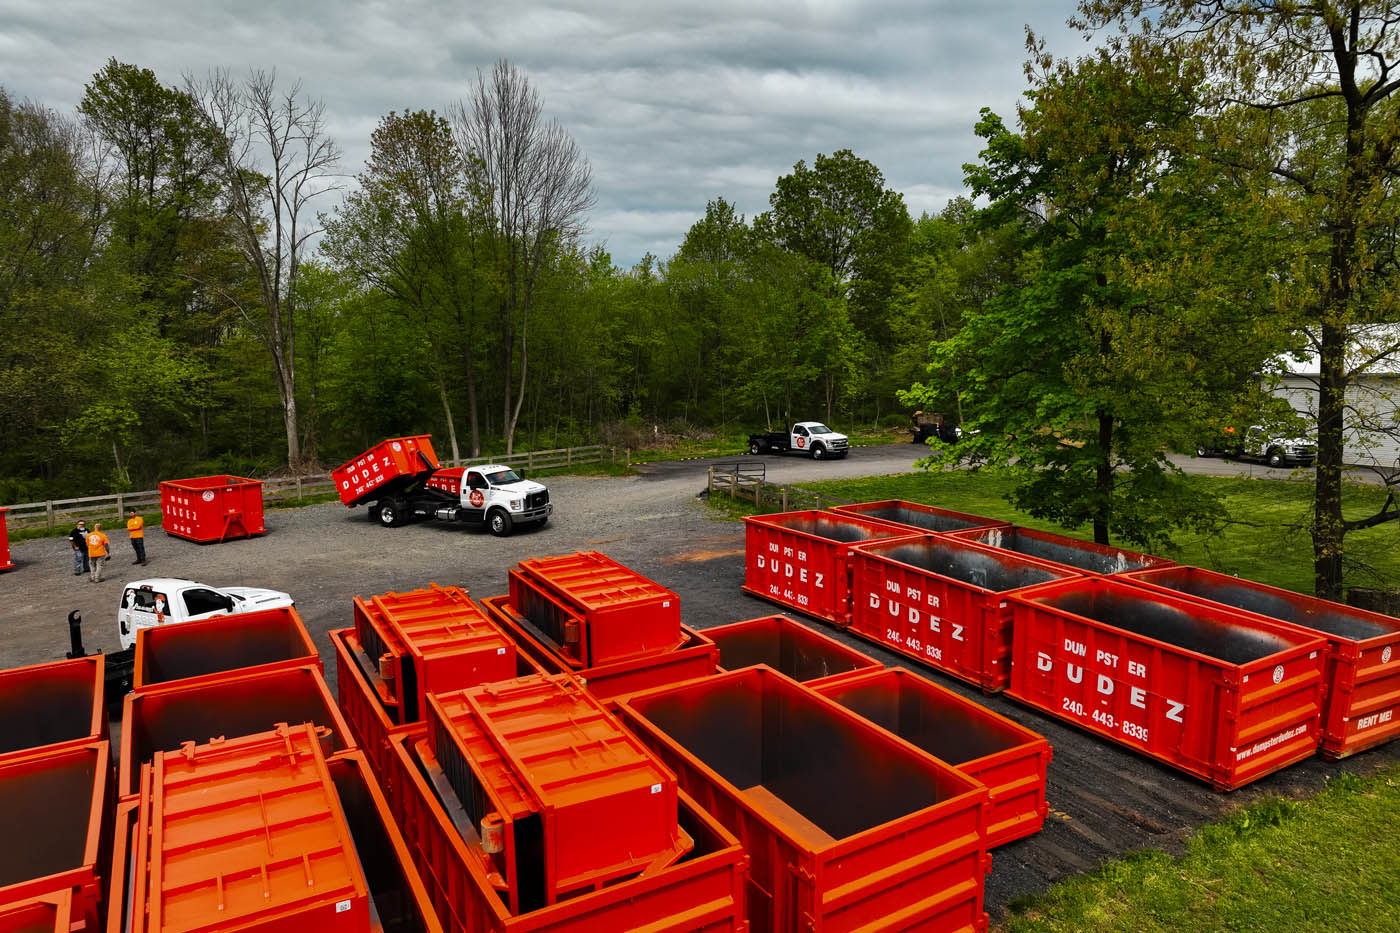 Dumpster Dudez dumpsters - learn how you can benefit from renting a dumpster today!